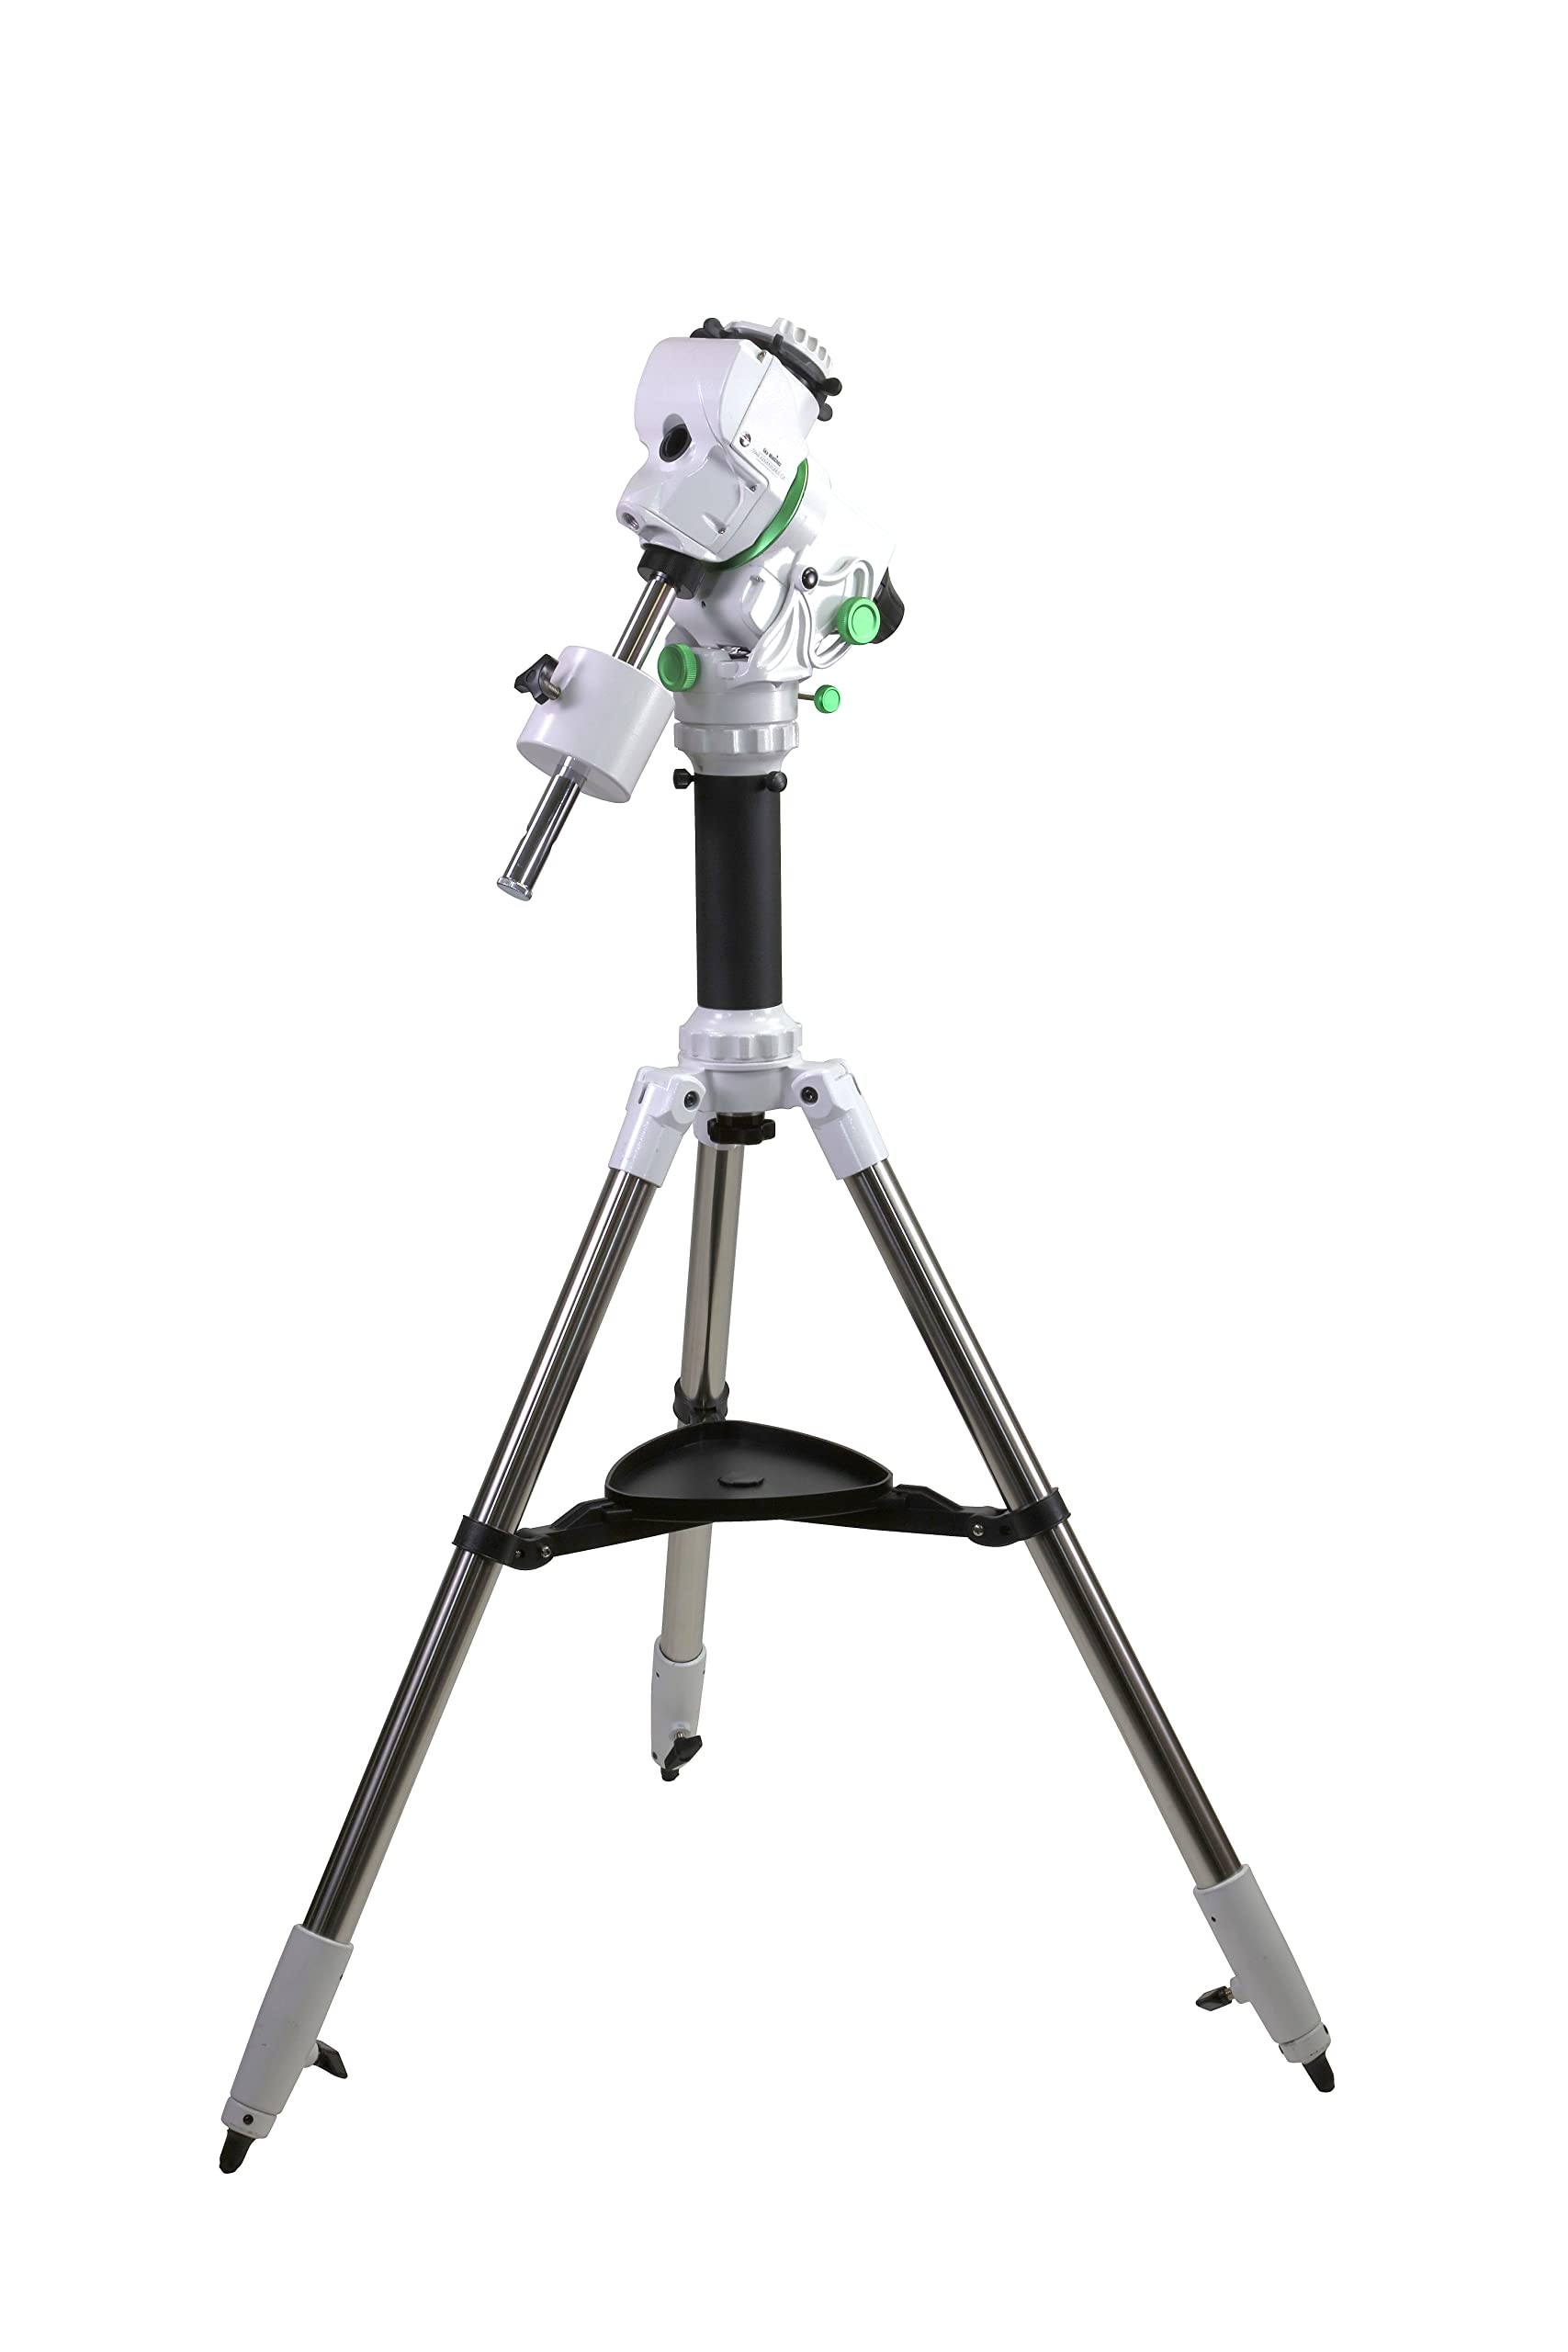 Sky-Watcher Star Adventurer GTI Mount Kit with Counterweight, CW bar, Tripod, and Pier Extension - Full GoTo EQ Tracking Mount for Portable and Lightweight Astrophotography